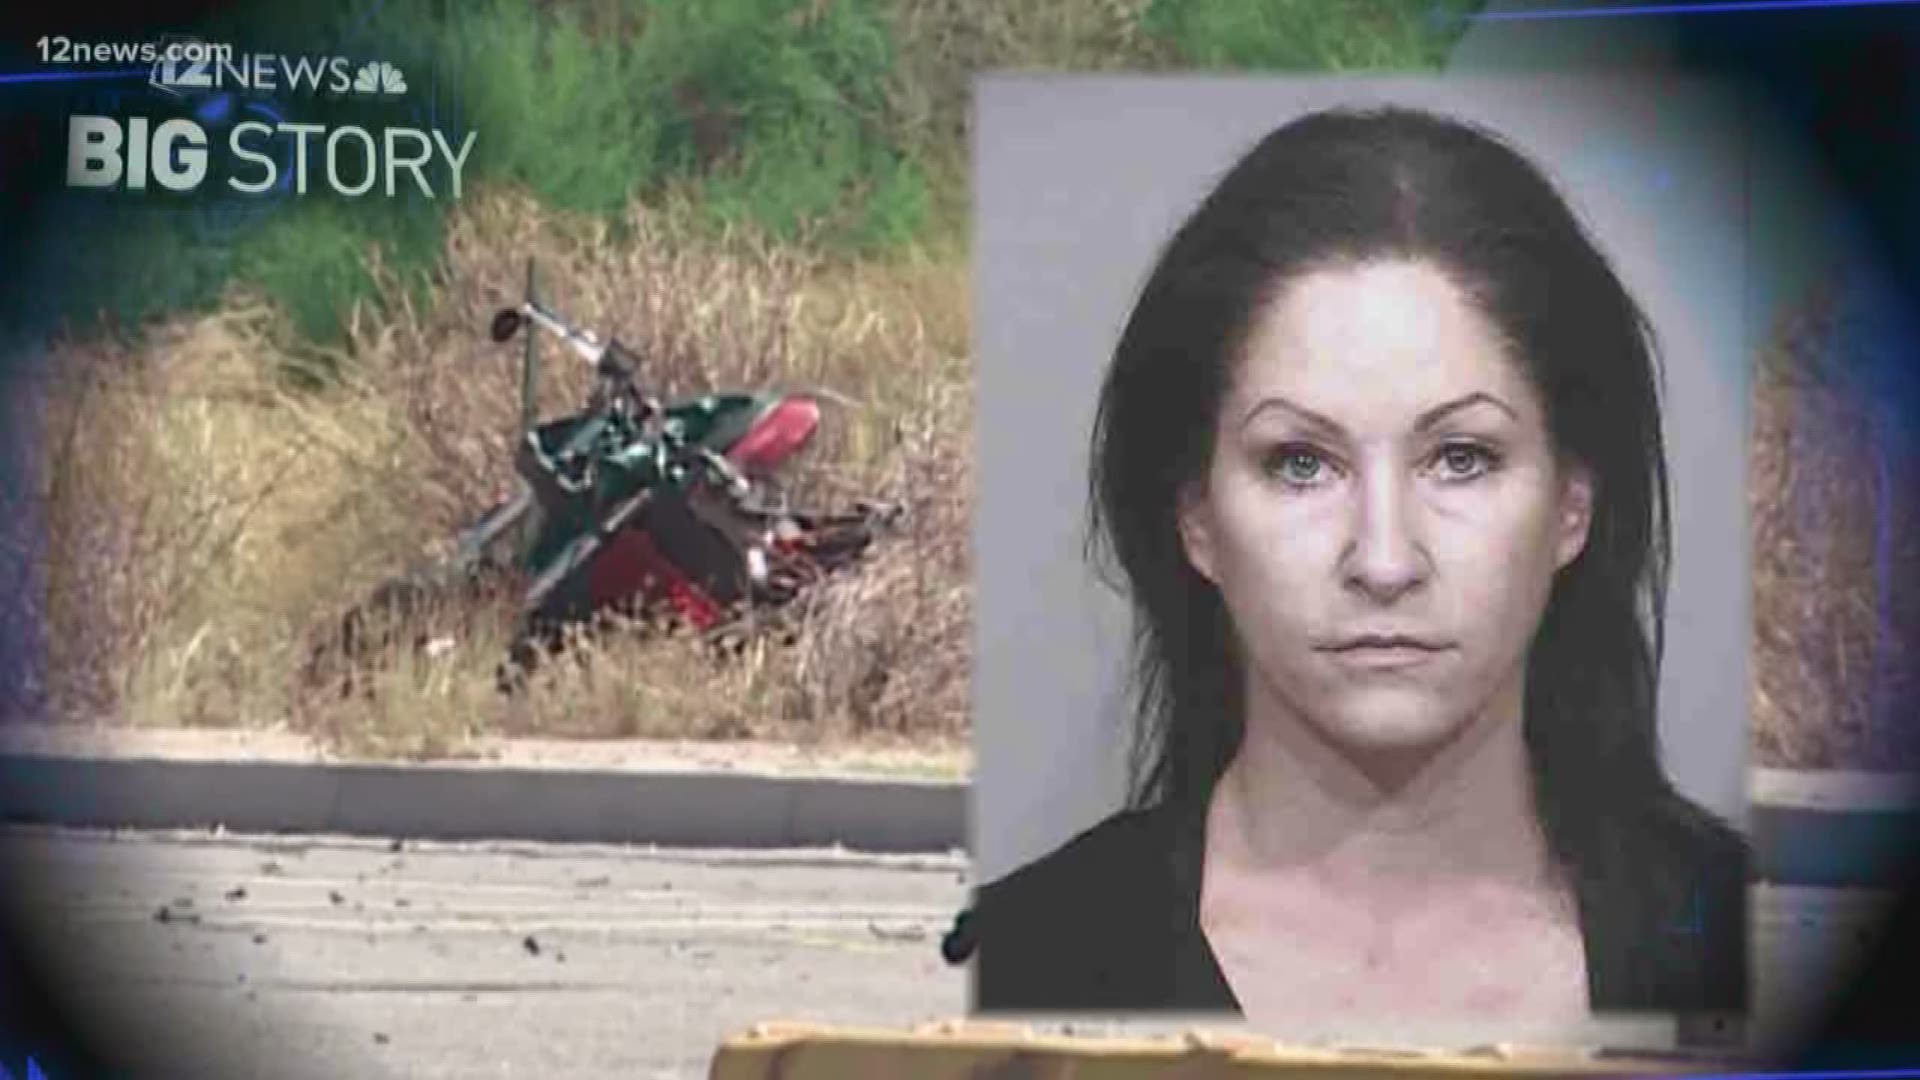 Tracy Shelden Morehouse was arrested for an alleged fatal car crash that killed a motorcyclist, according to Scottsdale police.